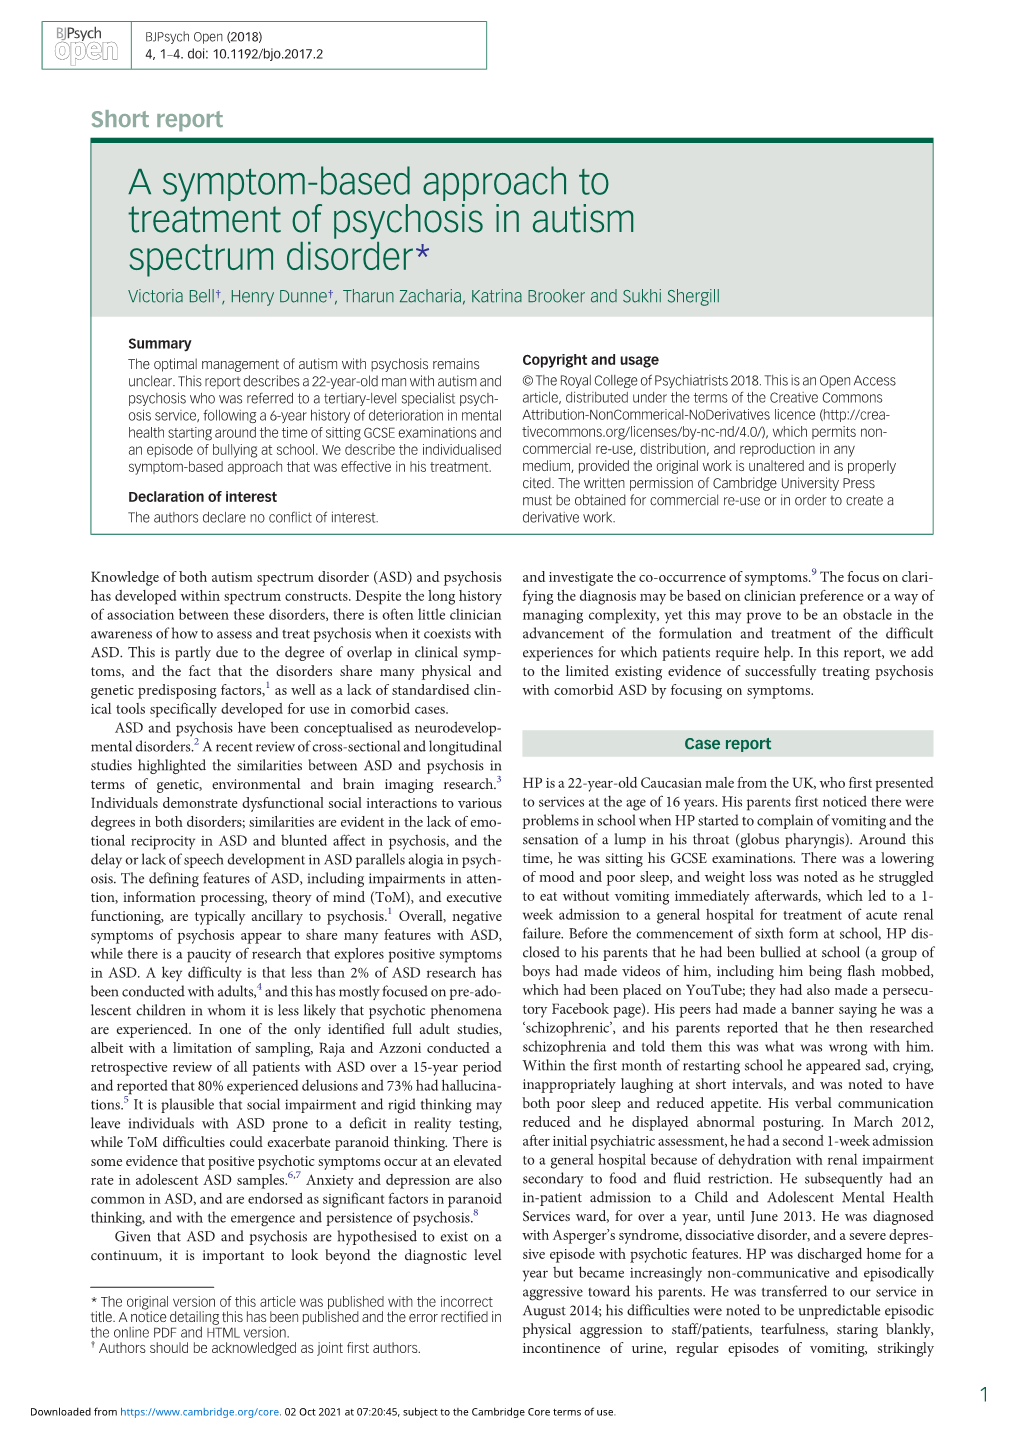 A Symptom-Based Approach to Treatment of Psychosis in Autism Spectrum Disorder* Victoria Bell†, Henry Dunne†, Tharun Zacharia, Katrina Brooker and Sukhi Shergill